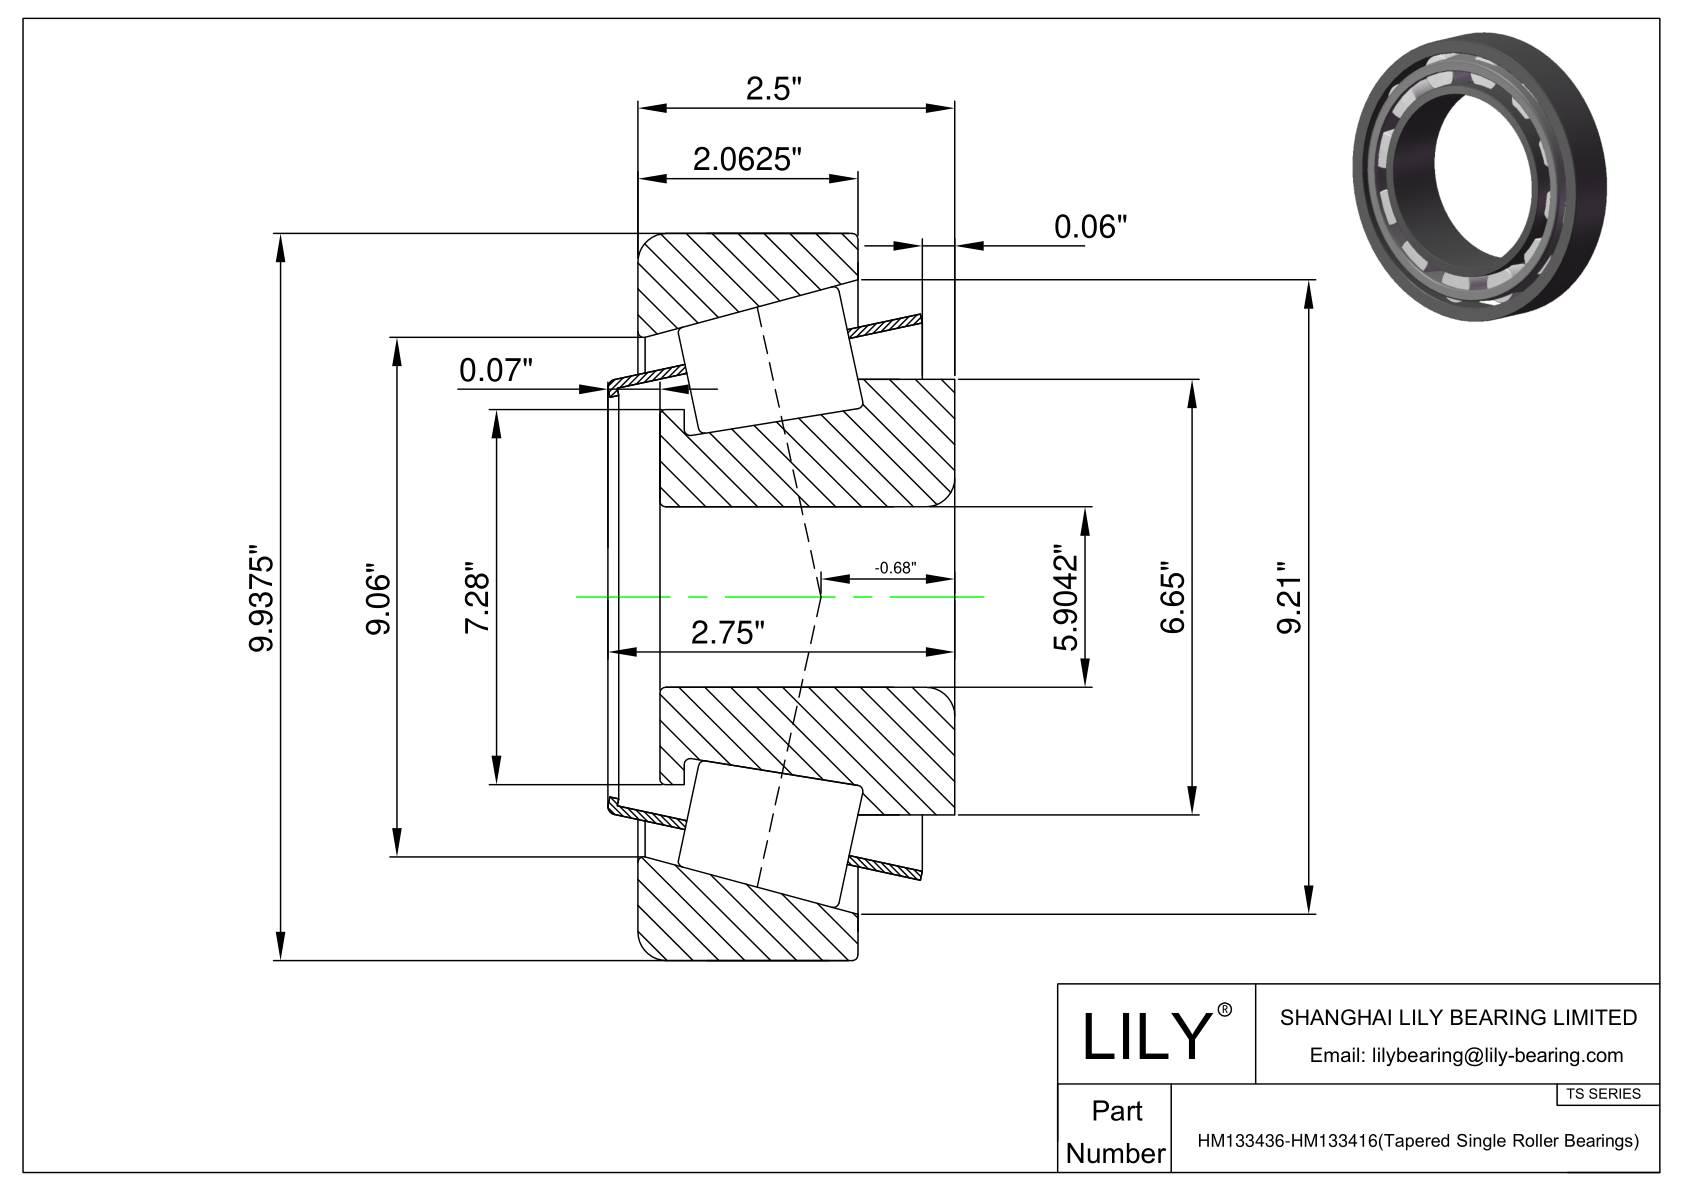 HM133436-HM133416 TS (Tapered Single Roller Bearings) (Imperial) cad drawing